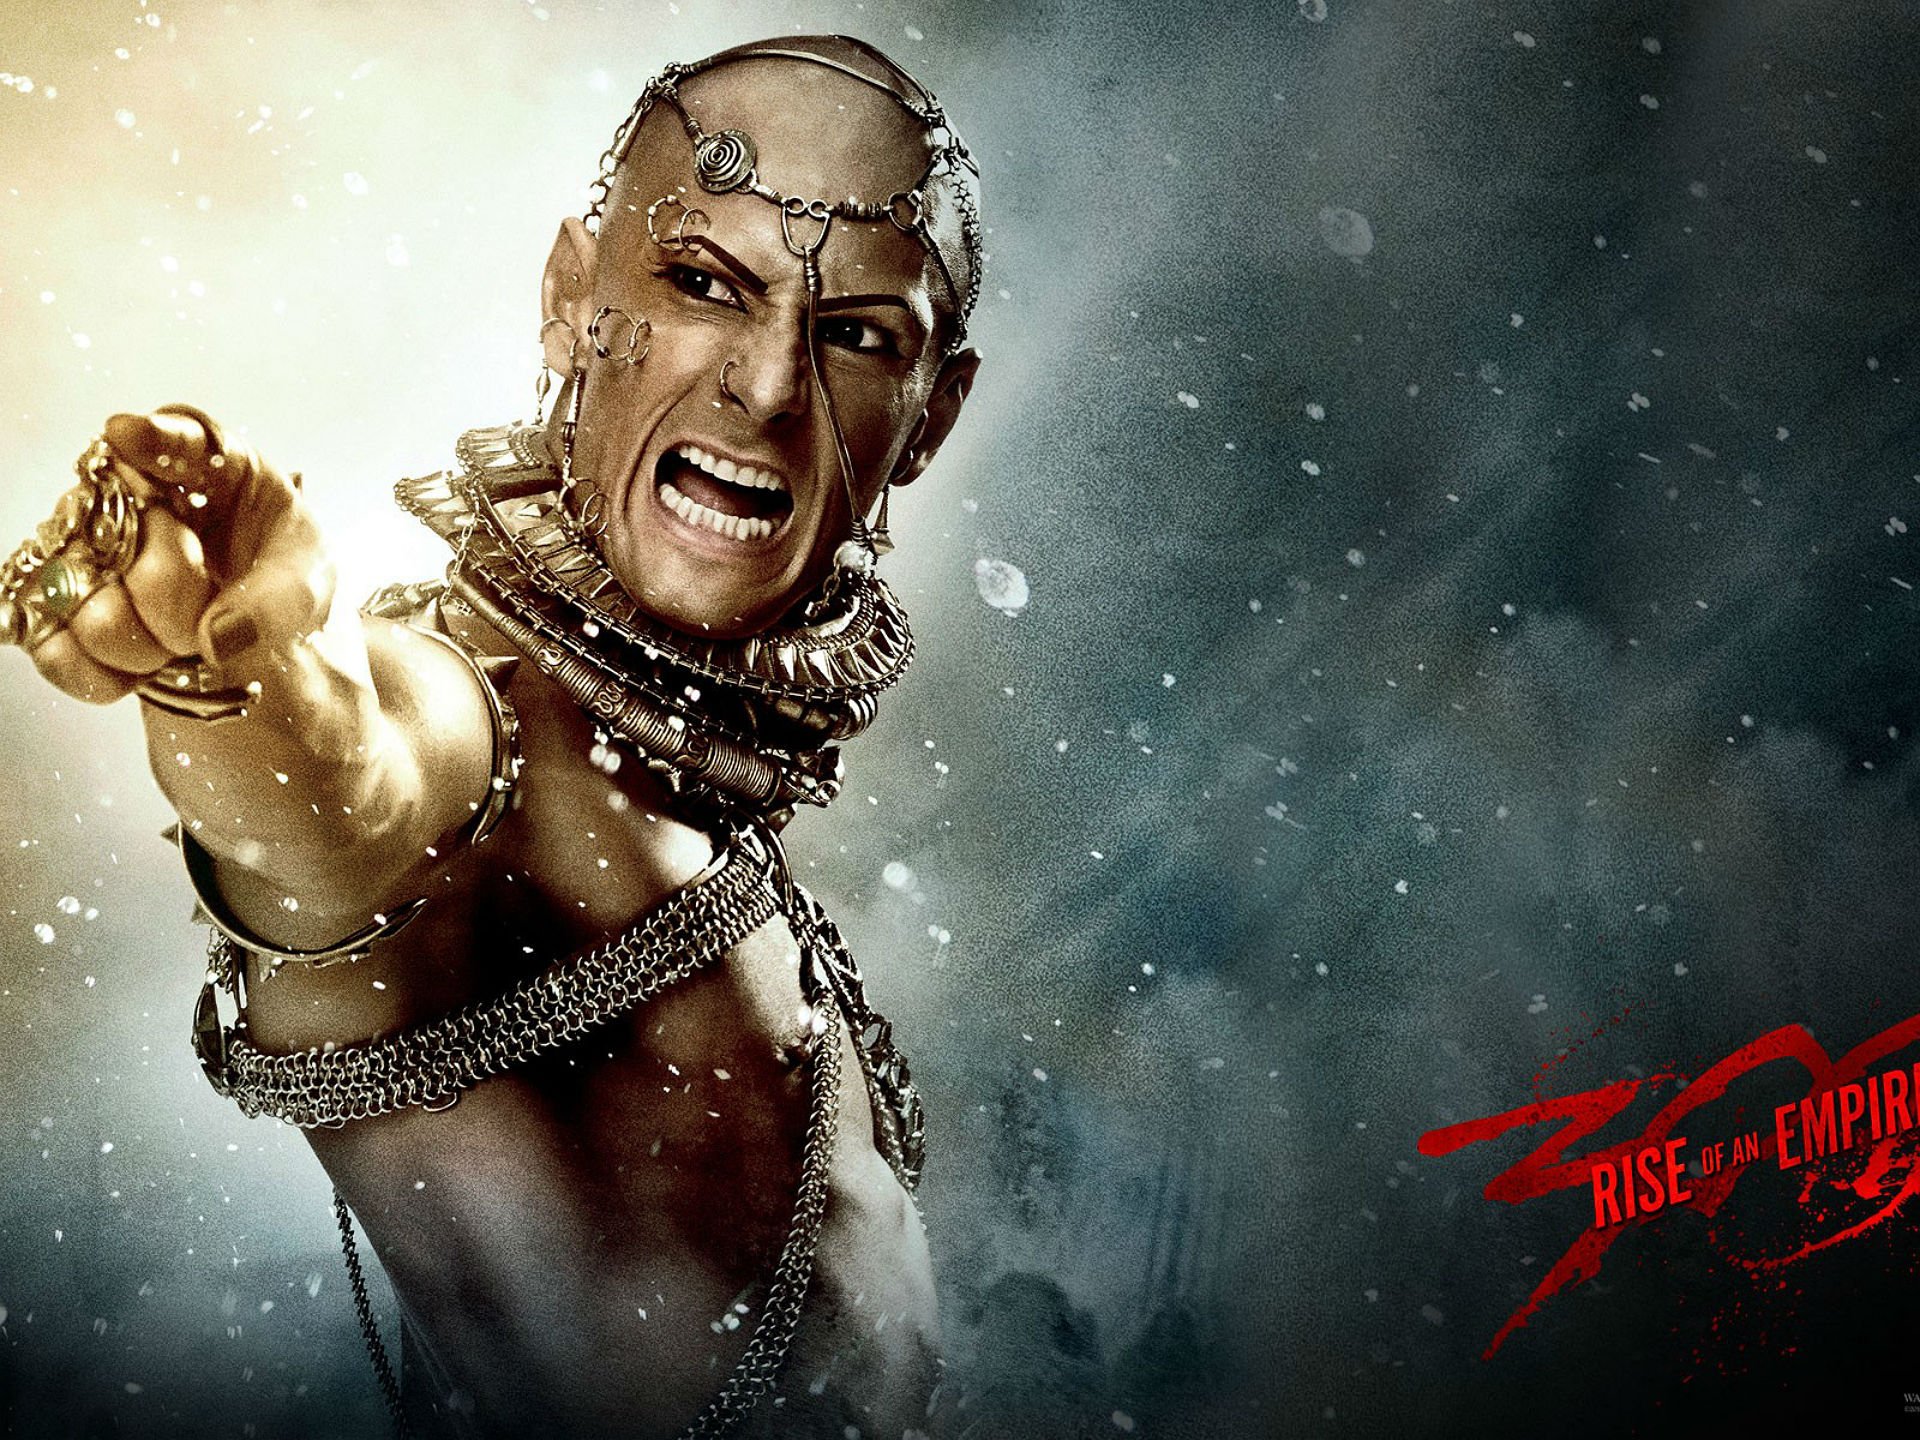 300, Rise, Of, An, Empire, Action, Drama, Fighting, Warrior, Fantasy, Spartan, Poster Wallpaper